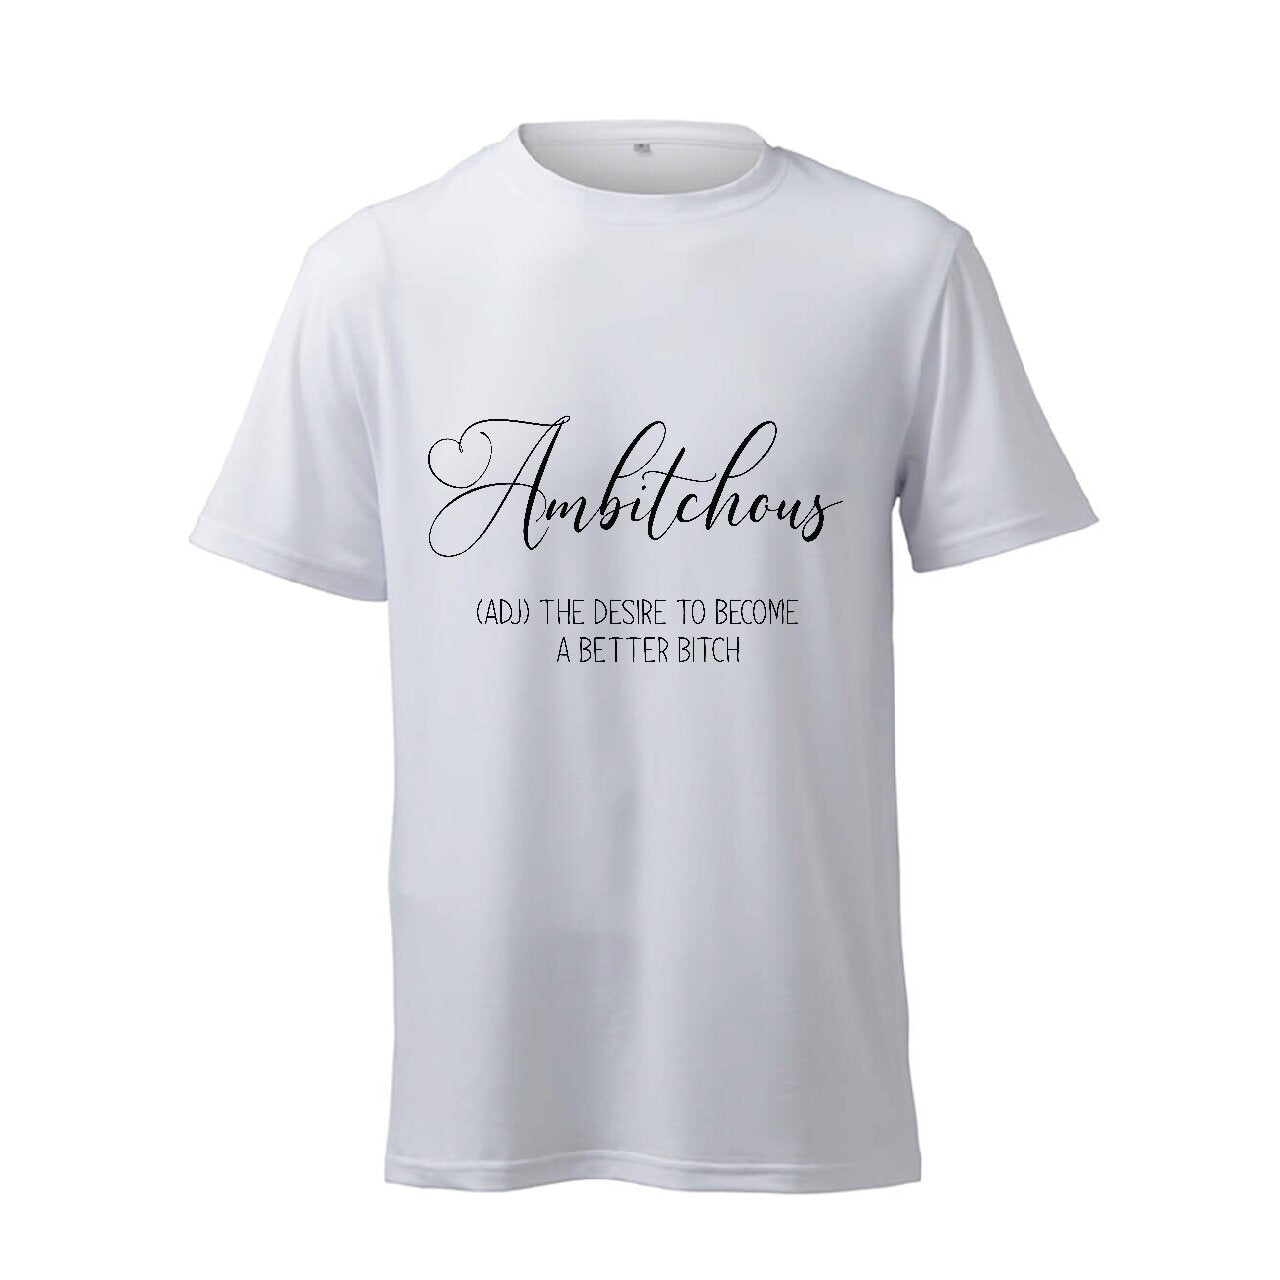 Ambitchous (ADJ) The Desire To Become A Better Bitch - T-Shirt